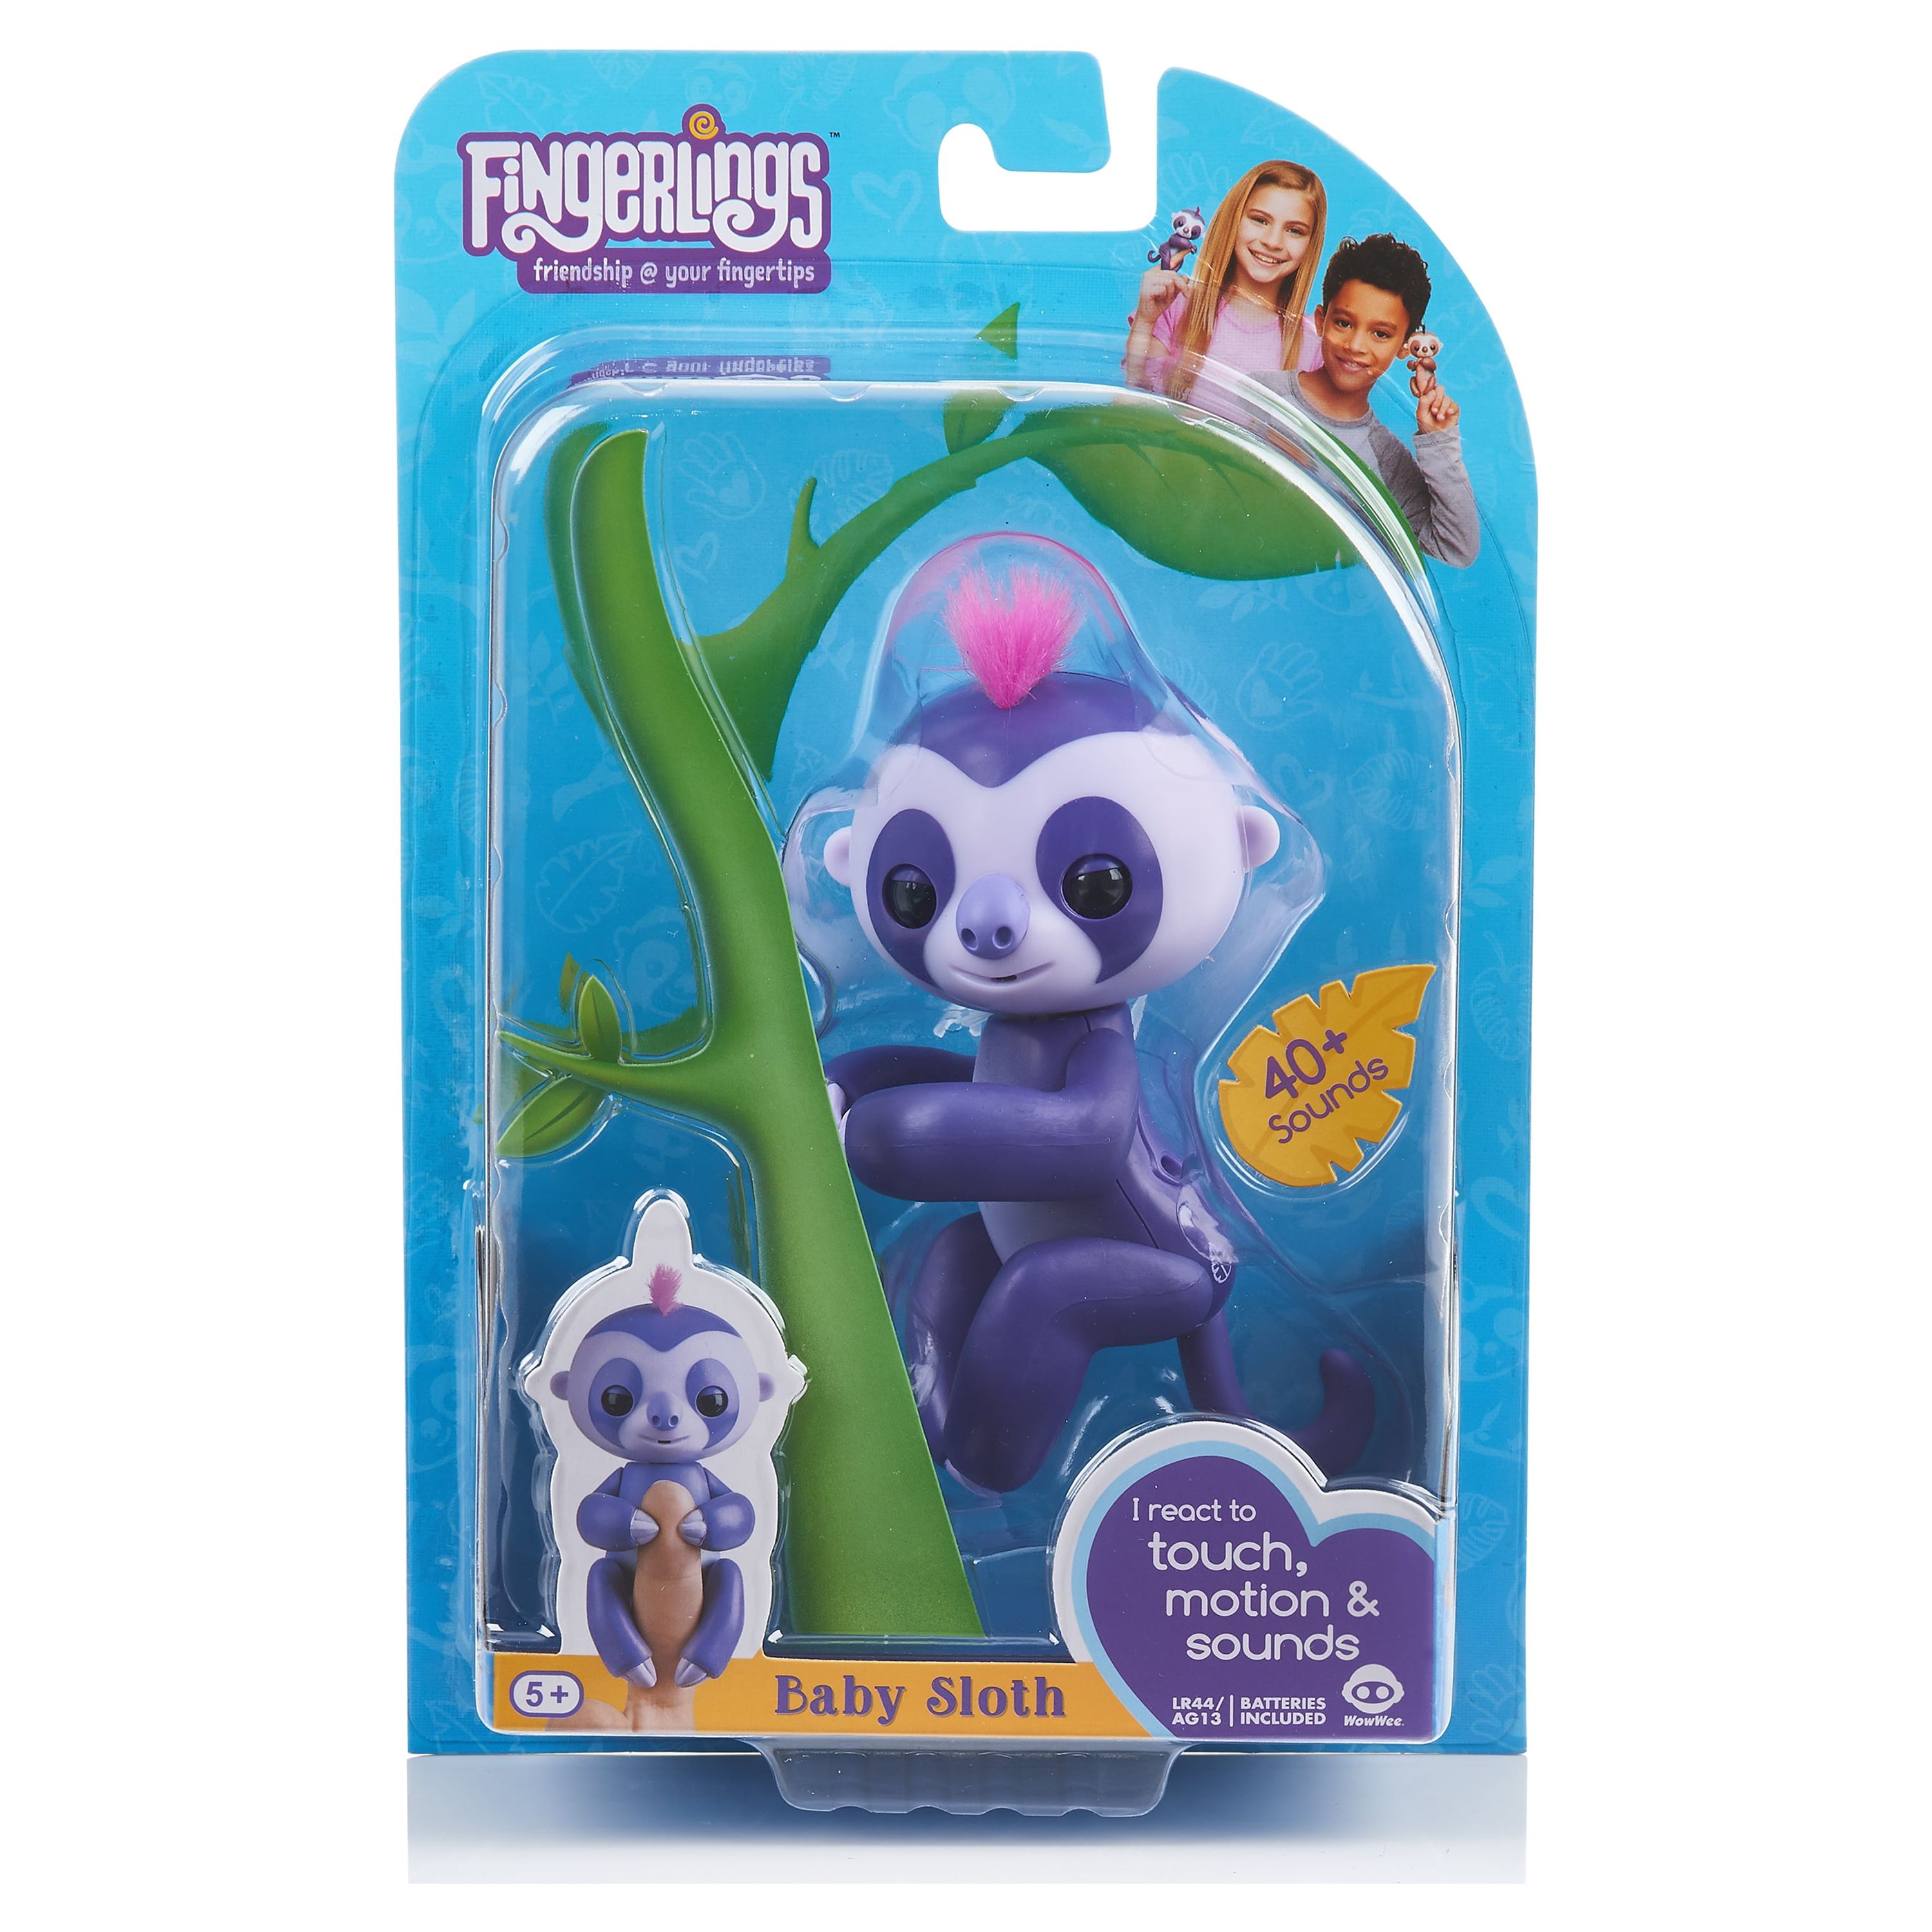 License 2 Play - Fingerlings sloth, Marge - image 1 of 6